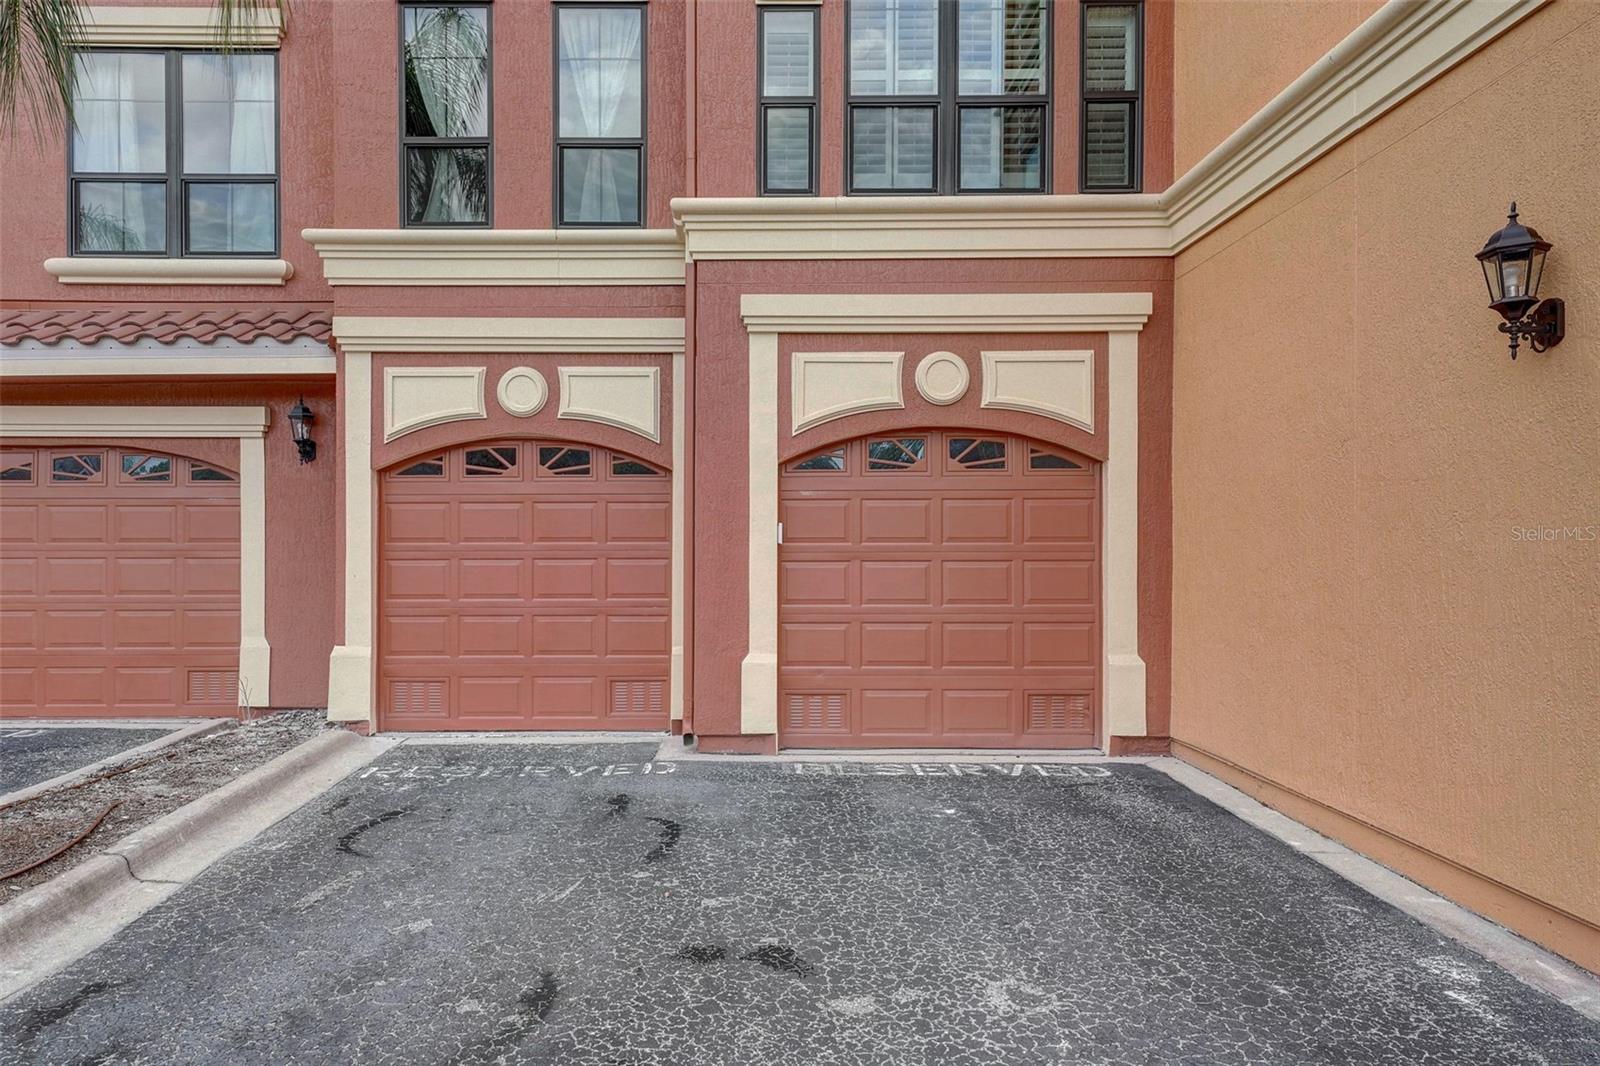 Two car garage and two parking spaces in front of garage